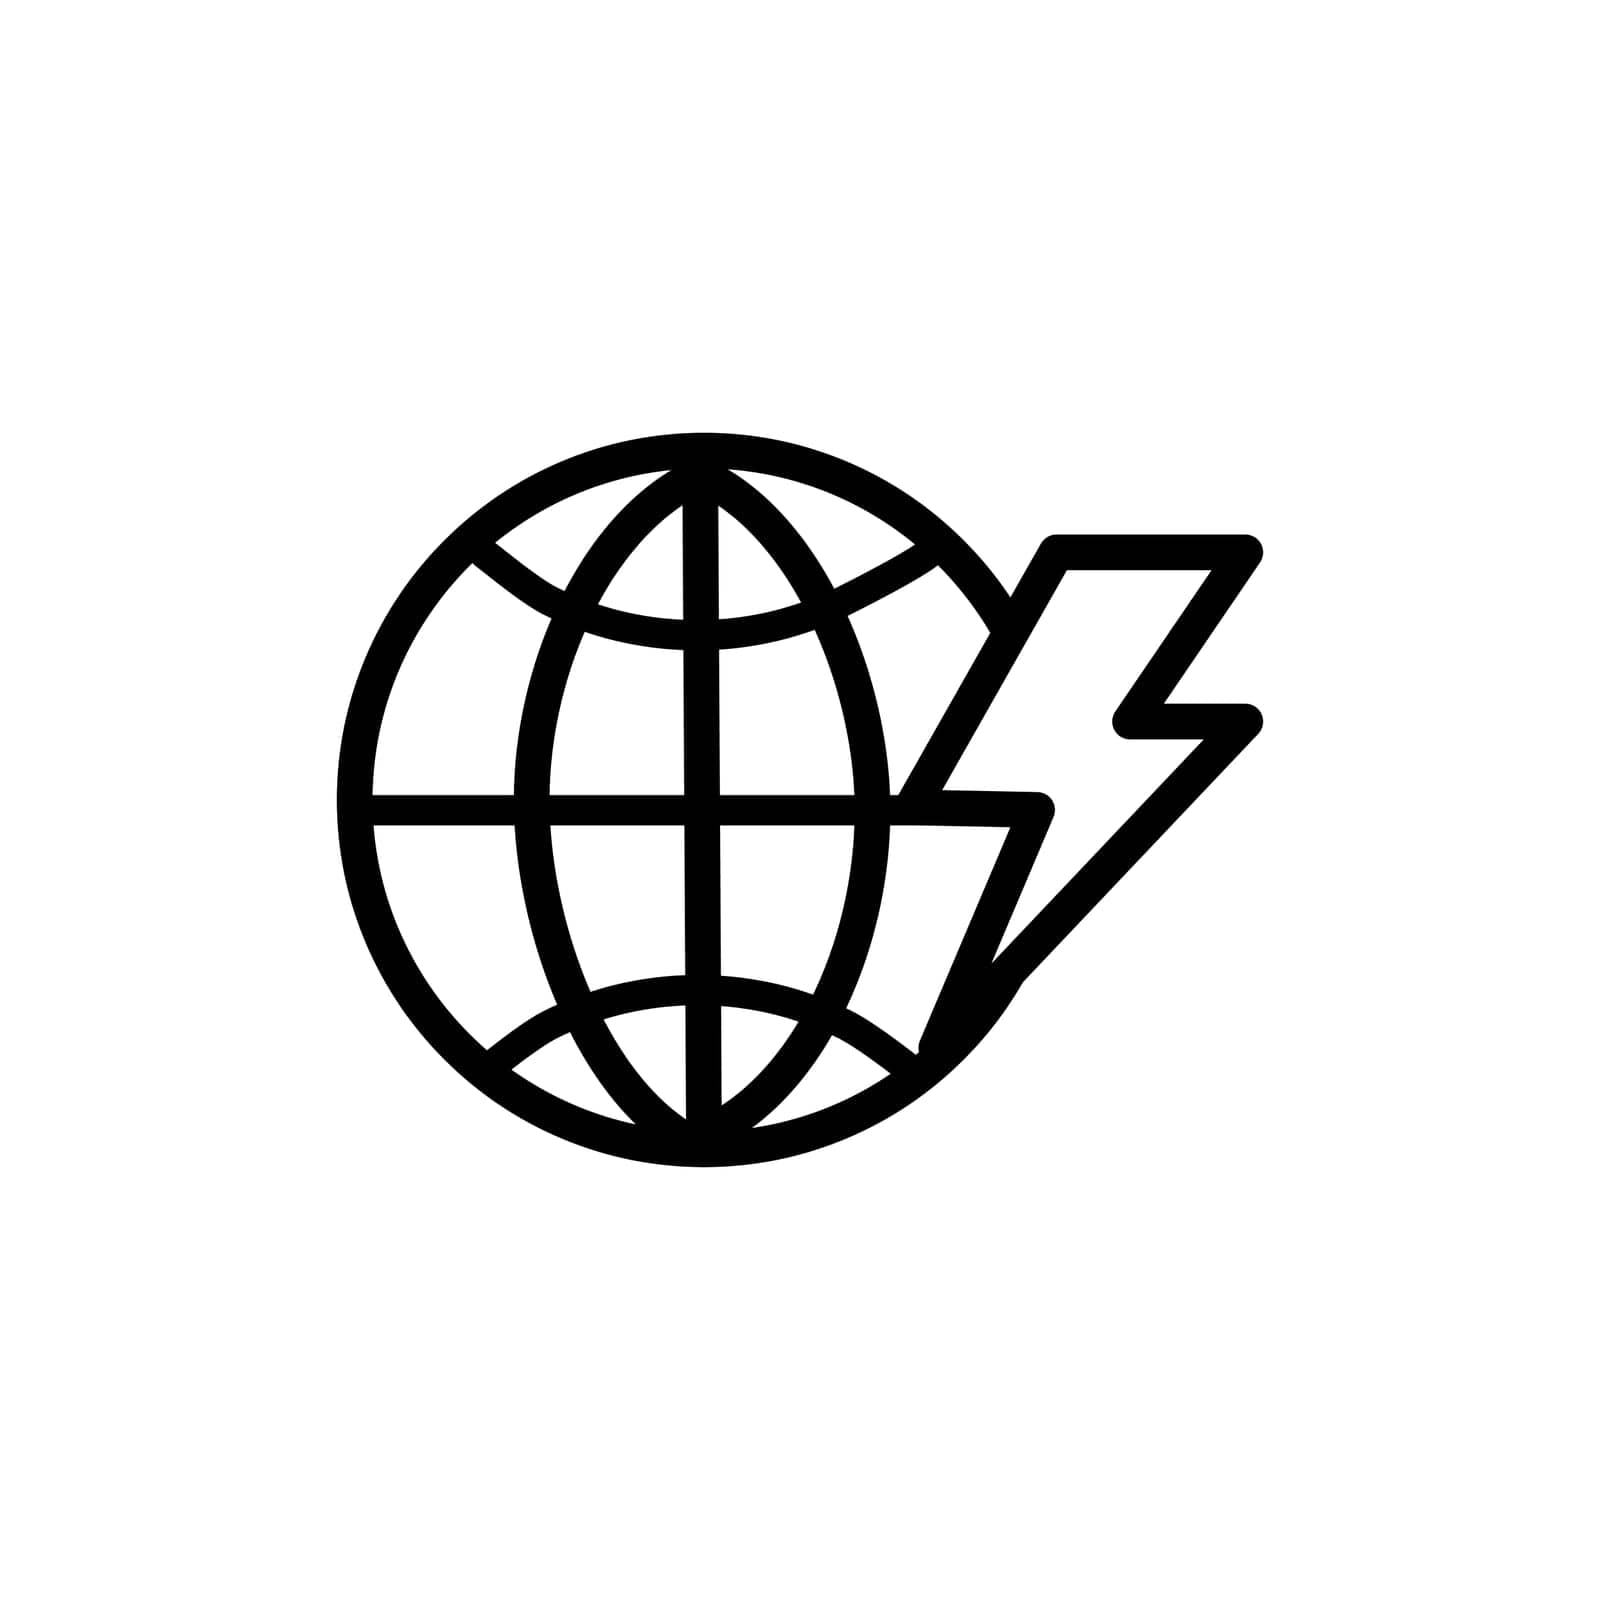 Global energy crisis, low electricity, low energy cost simple vector icon illustration